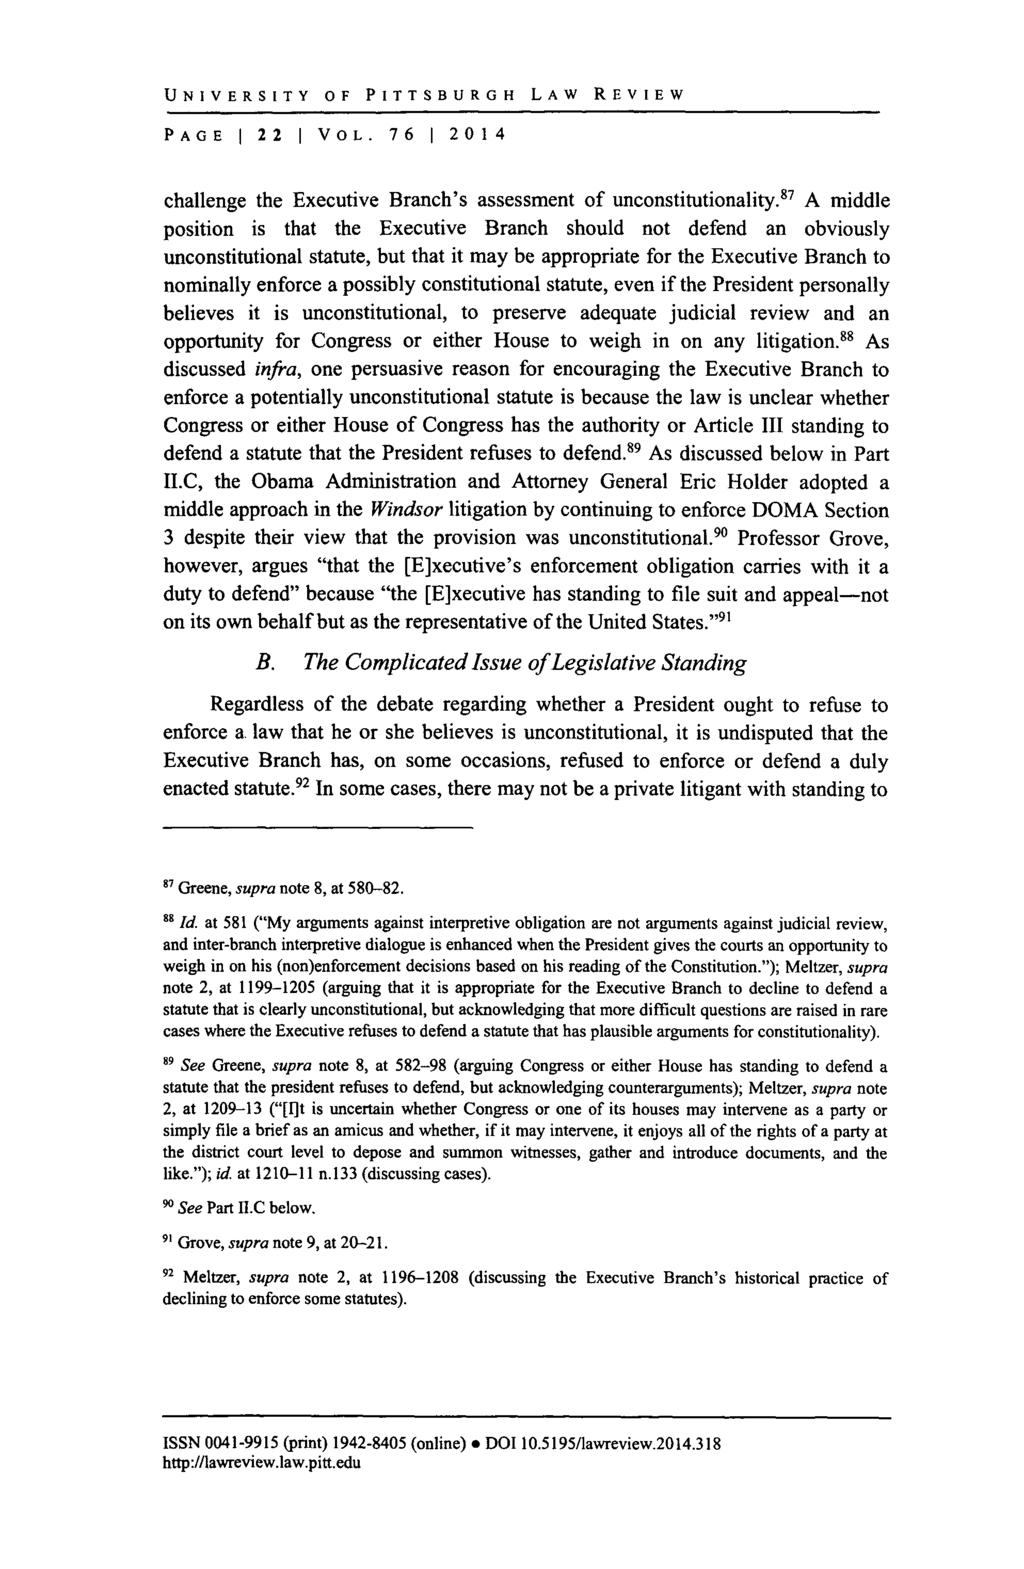 UNIVERSITY OF PITTSBURGH LAW REVIEW PAGE I 22 I VOL. 76 1 2014 challenge the Executive Branch's assessment of unconstitutionality.